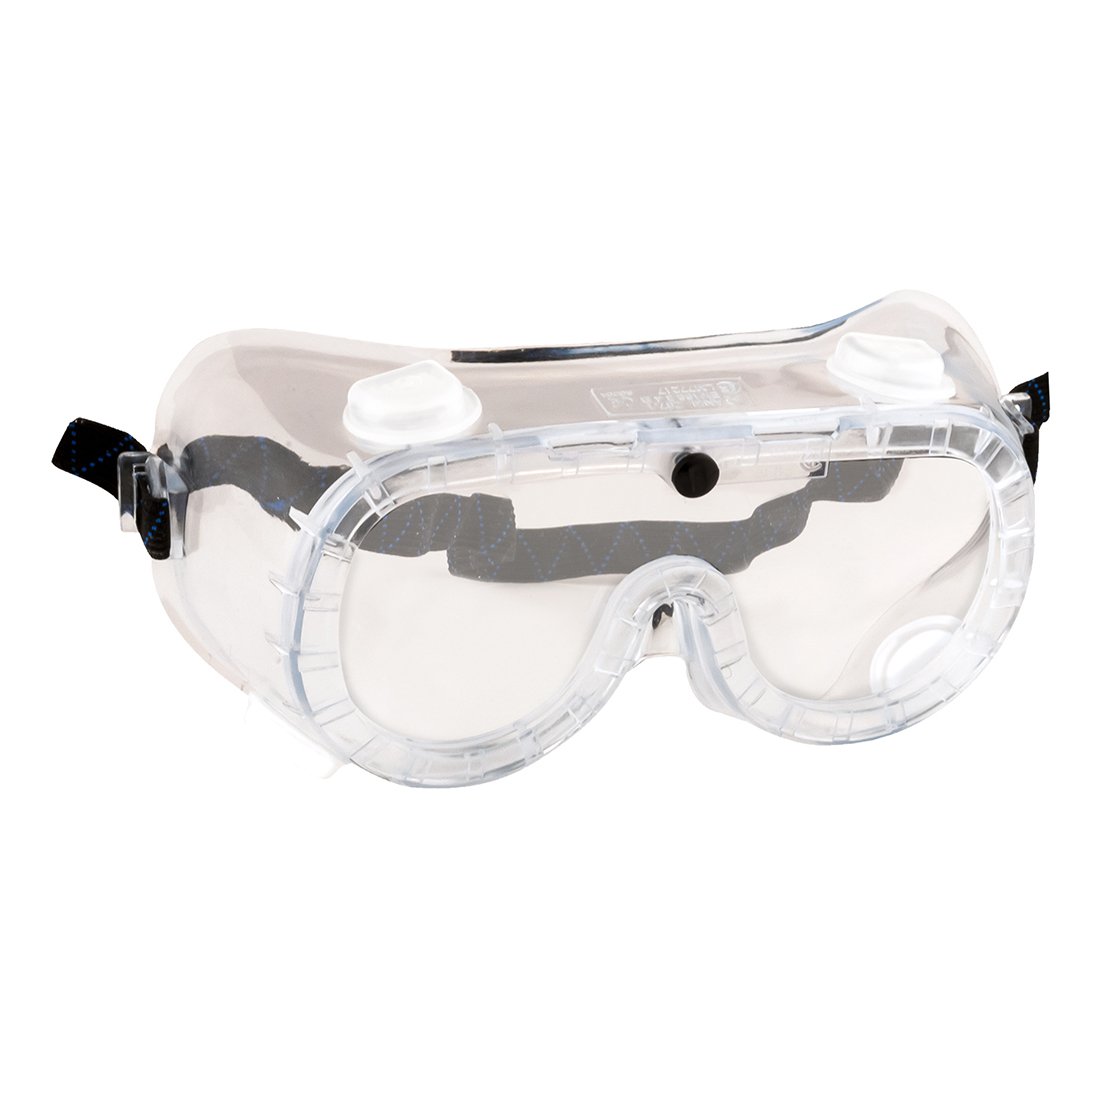 Portwest PW21 Medical Safety Goggles suppliers in Hyderabad, Telangana, India